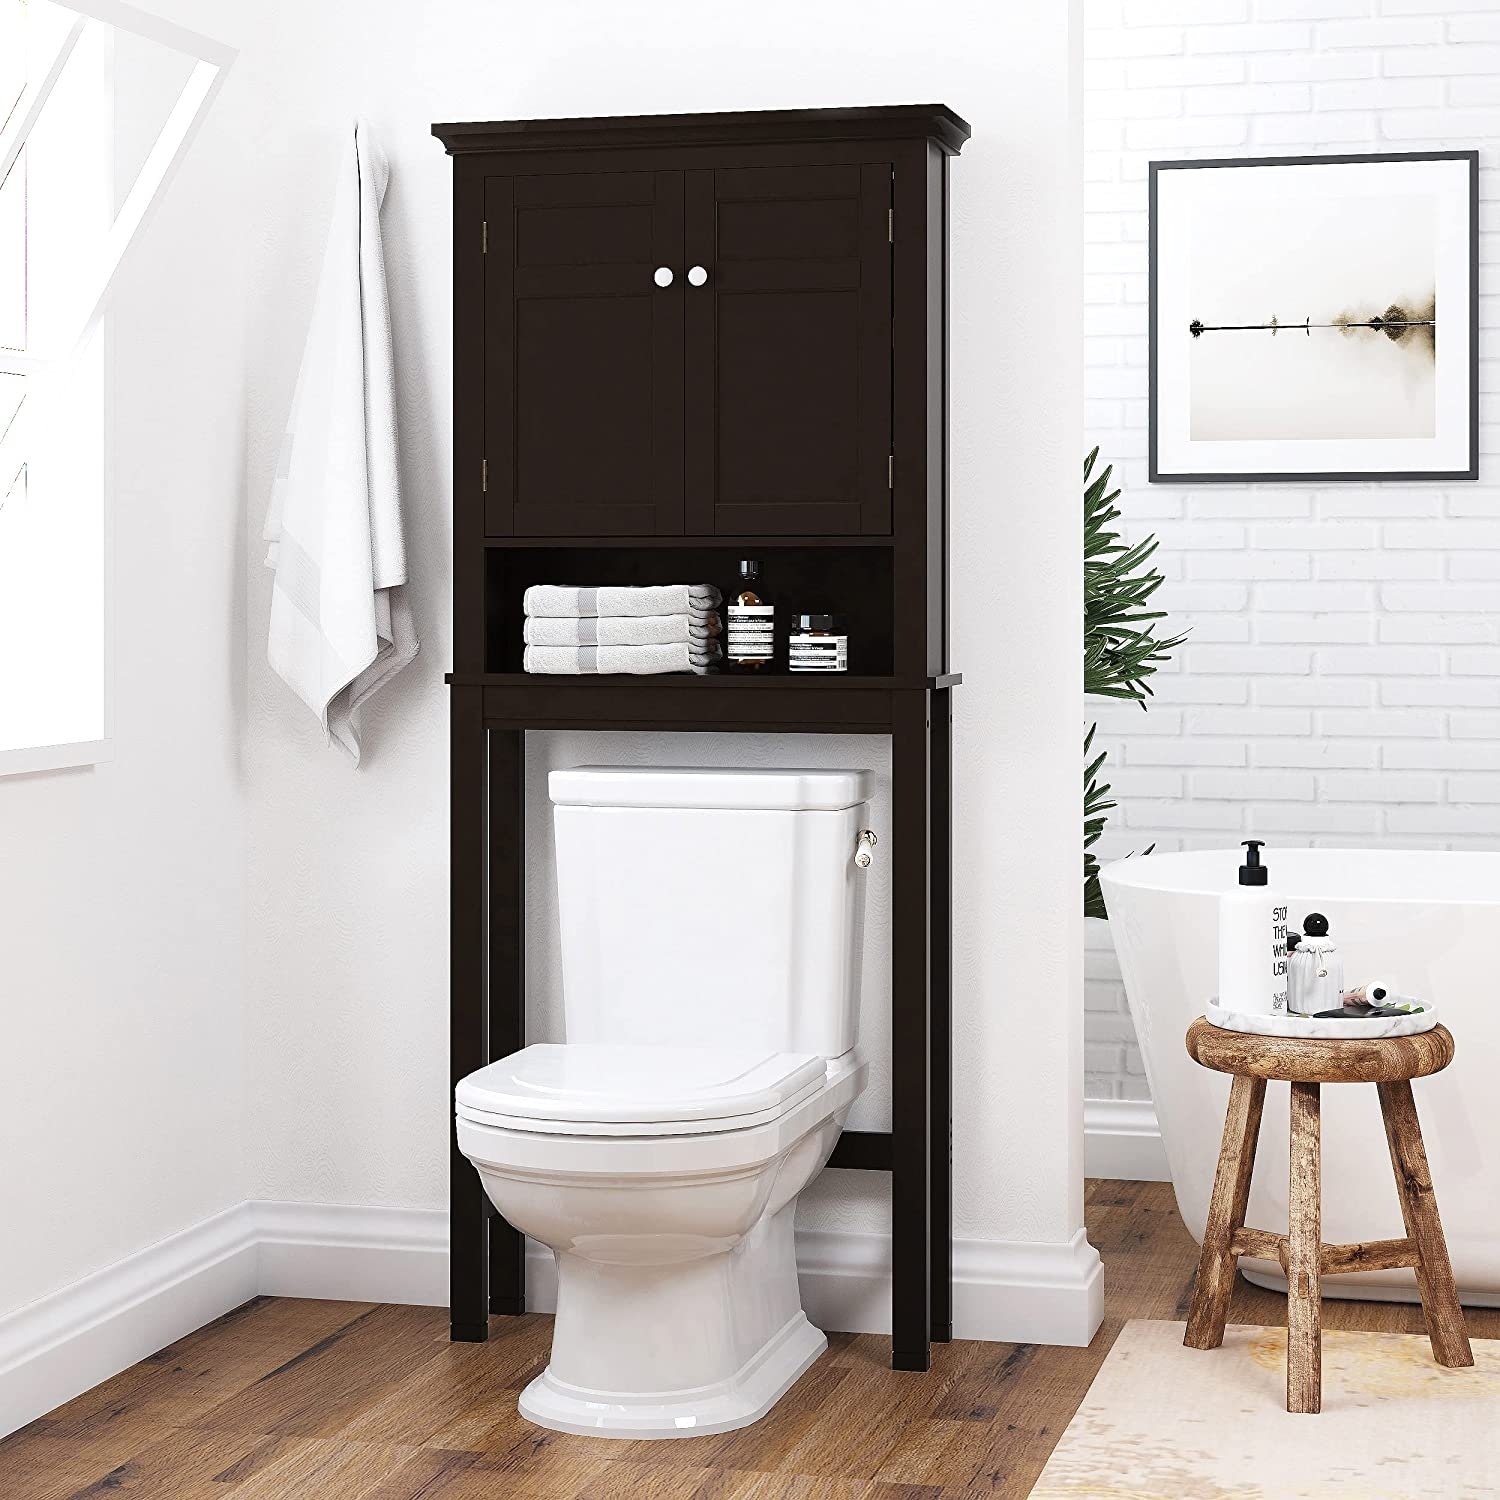 https://ak1.ostkcdn.com/images/products/is/images/direct/f066e1006abf69542c9b2f15df76417a5f9dae2c/Spirich-Home-Bathroom-Shelf-Over-The-Toilet%2C-Bathroom-SpaceSaver%2C-Bathroom-Bathroom-Storage-Cabinet-Organizer-with-Drawer.jpg